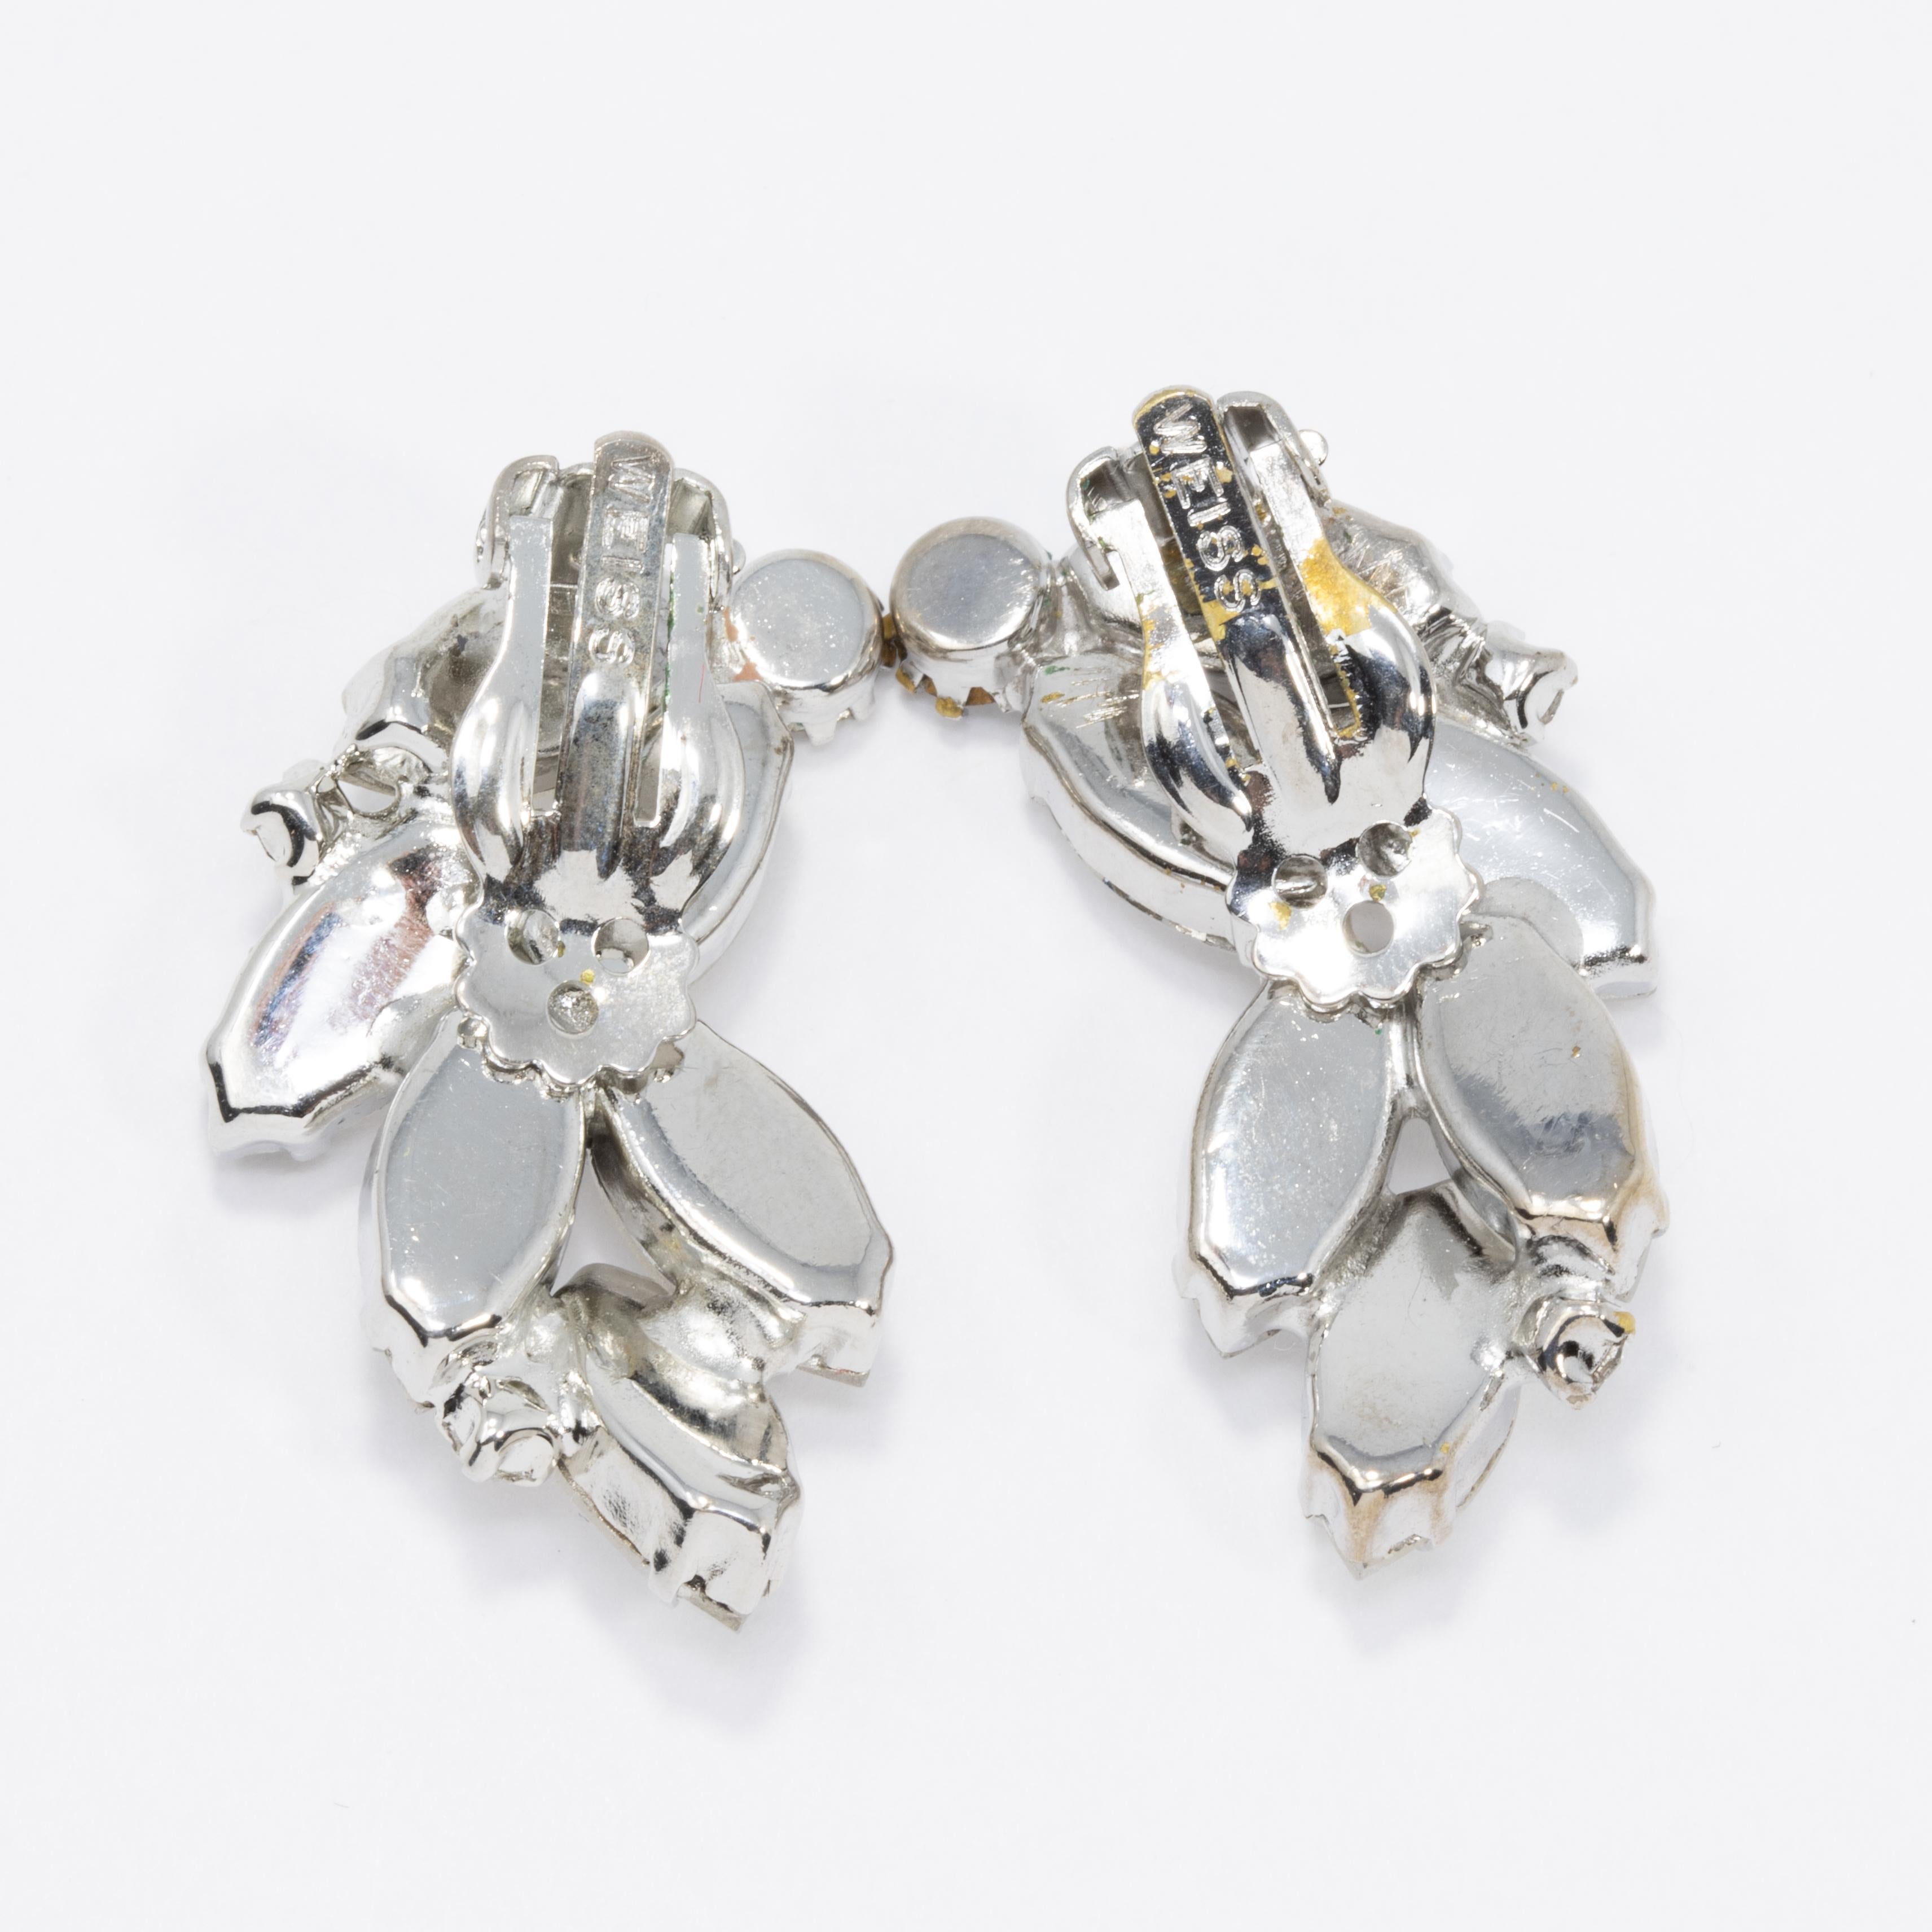 A stylish pair of vintage earrings, featuring  round and marquise-cut clear crystals on a silvertone setting.

Hallmarks: Weiss
